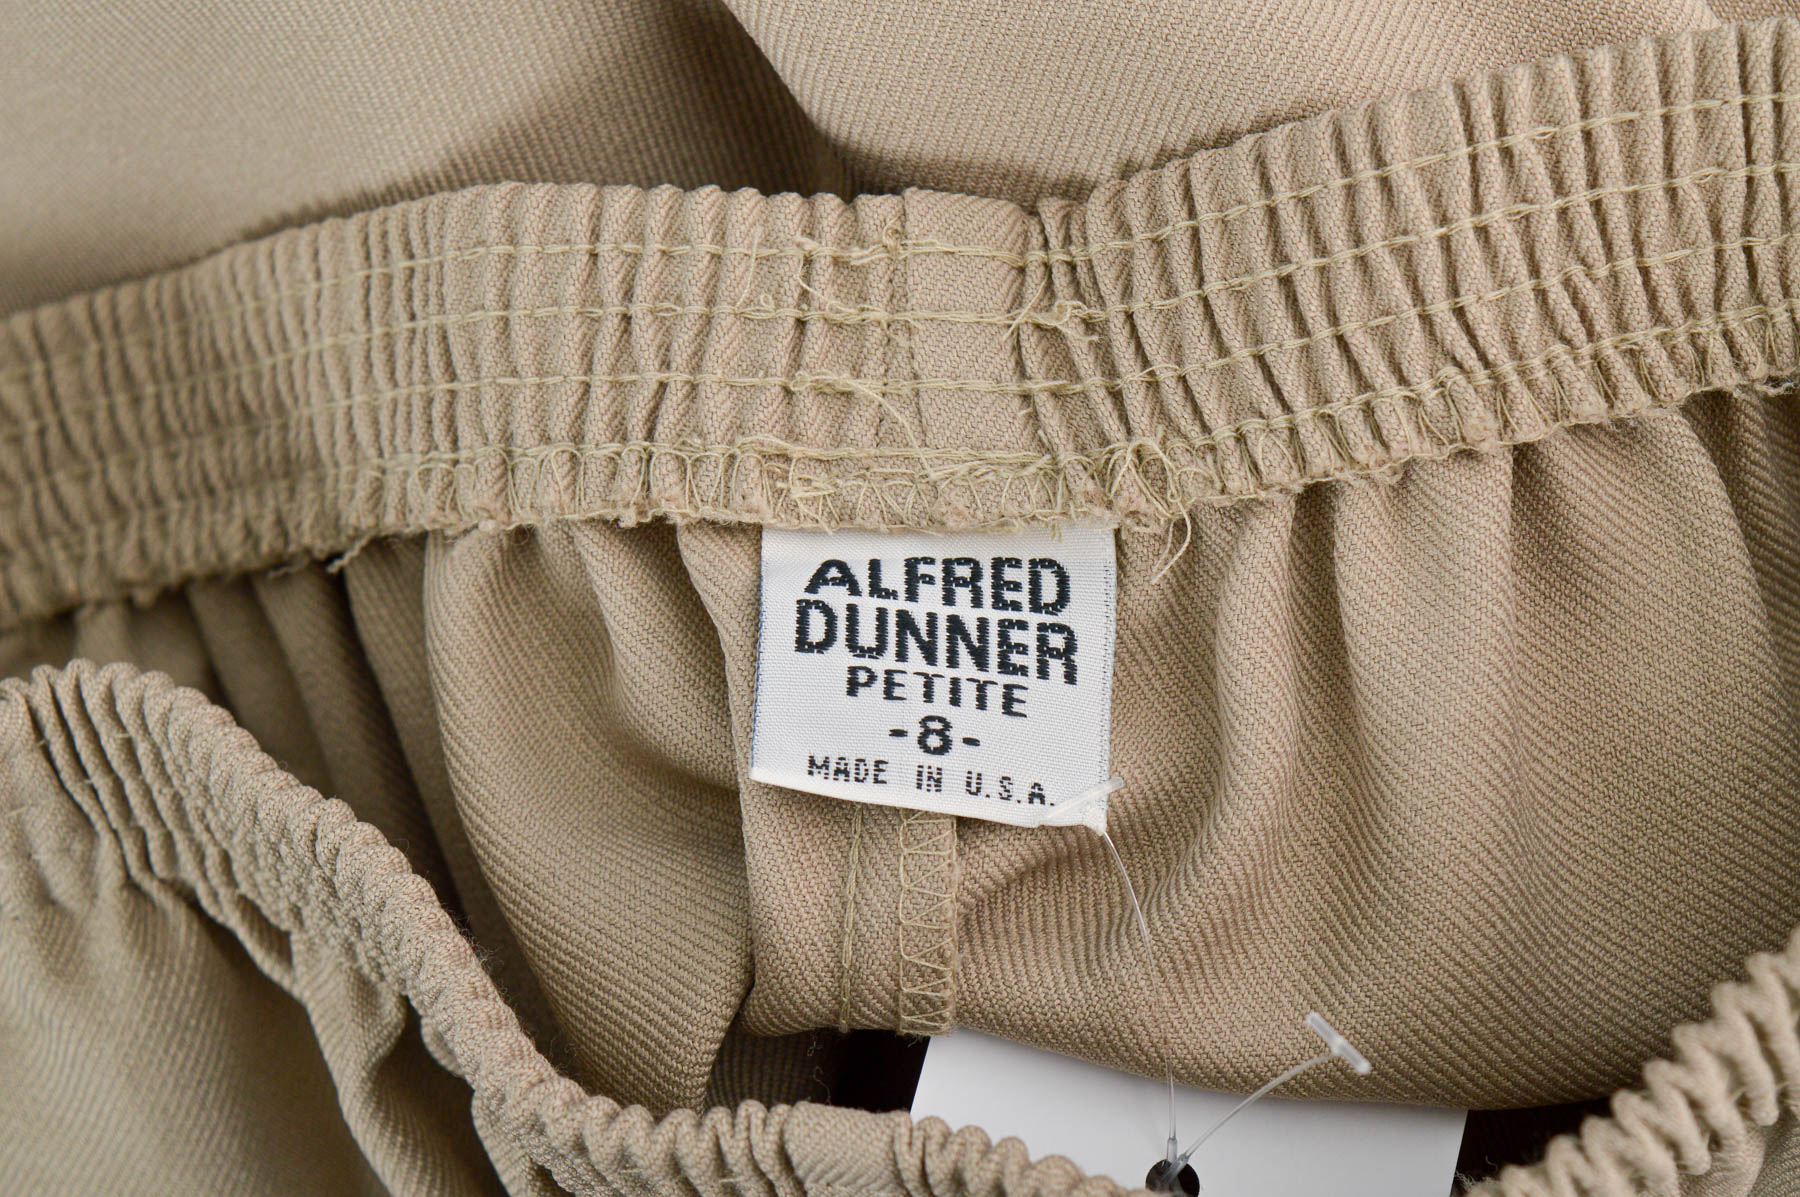 Women's trousers - Alfred dunner - 2